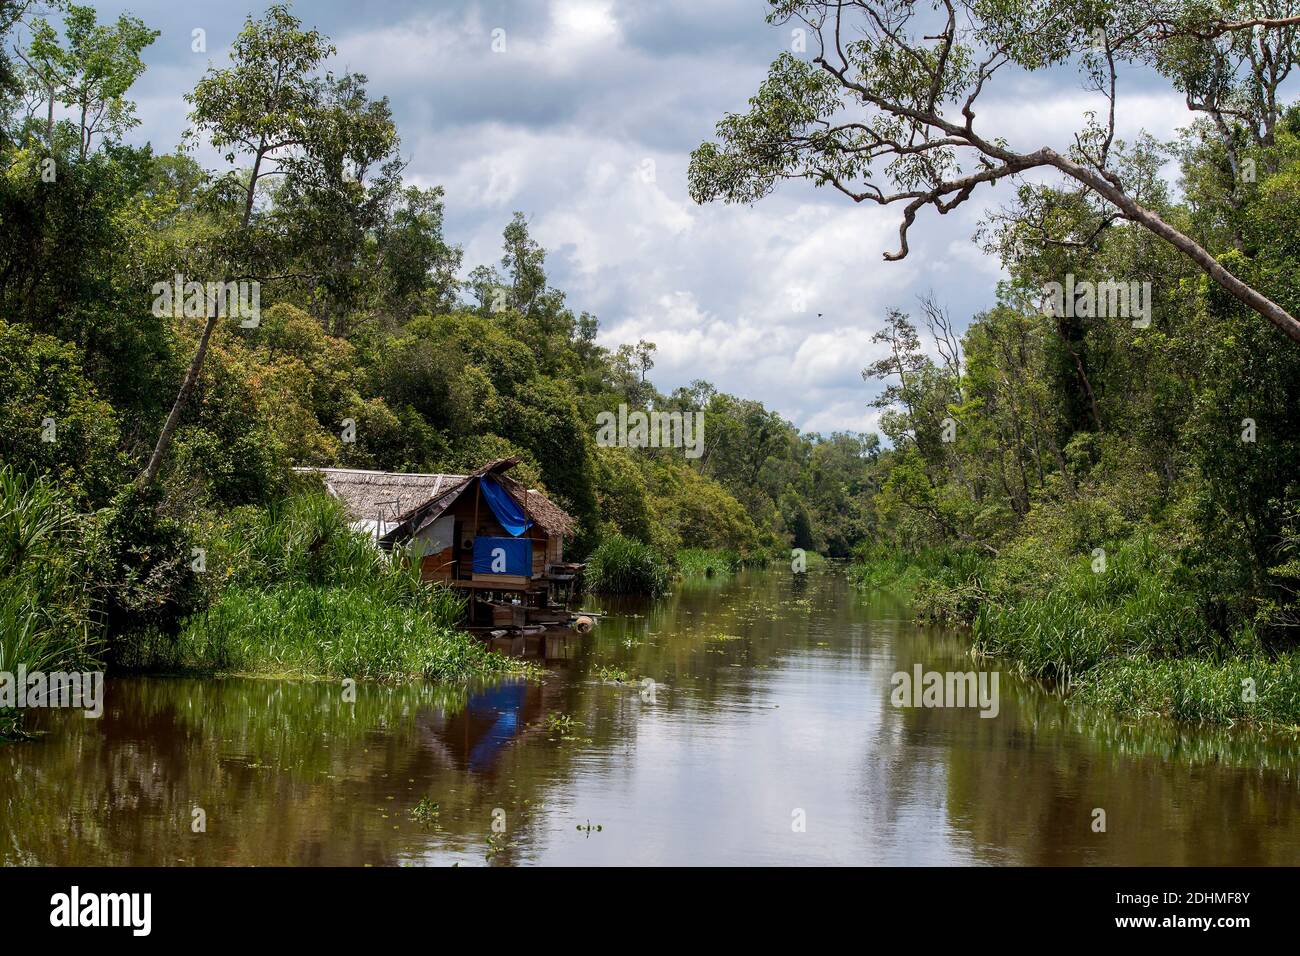 Rainforest and small cabin along the Sekonyer River (a tributary to Kumai River) in Kalimantan (Tanjung Puting National Park), southern Borneo. Stock Photo